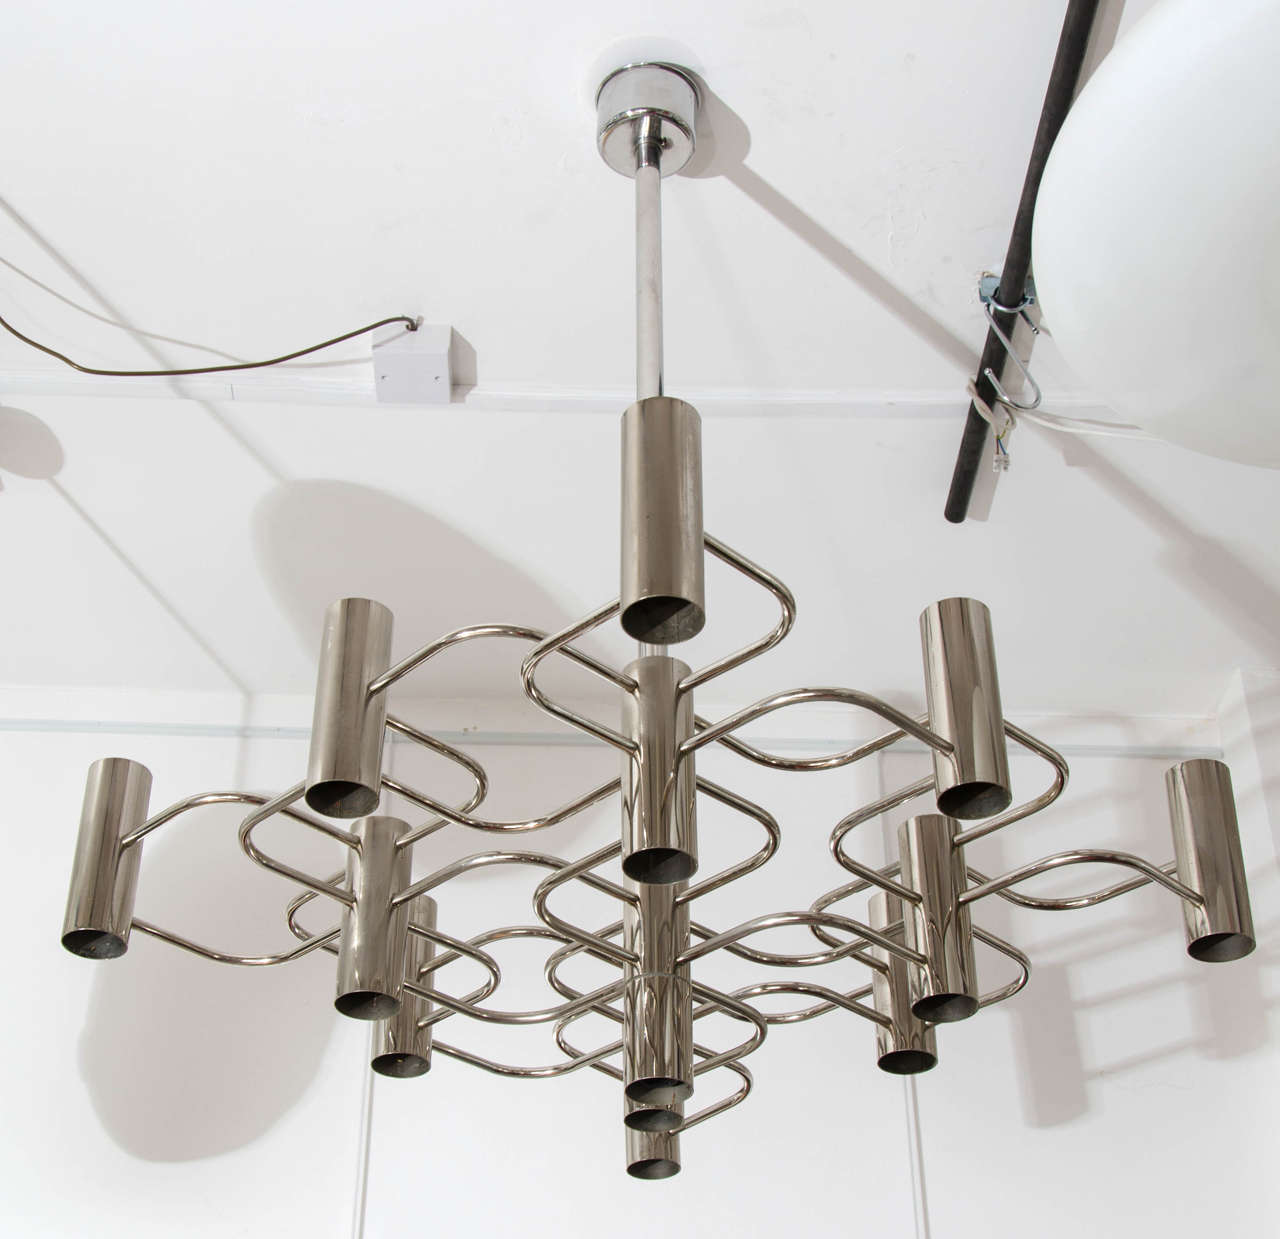 1970s chrome chandelier by Sciolari.
The symmetry of geometrical design is pleasing to look at. 
Good condition.